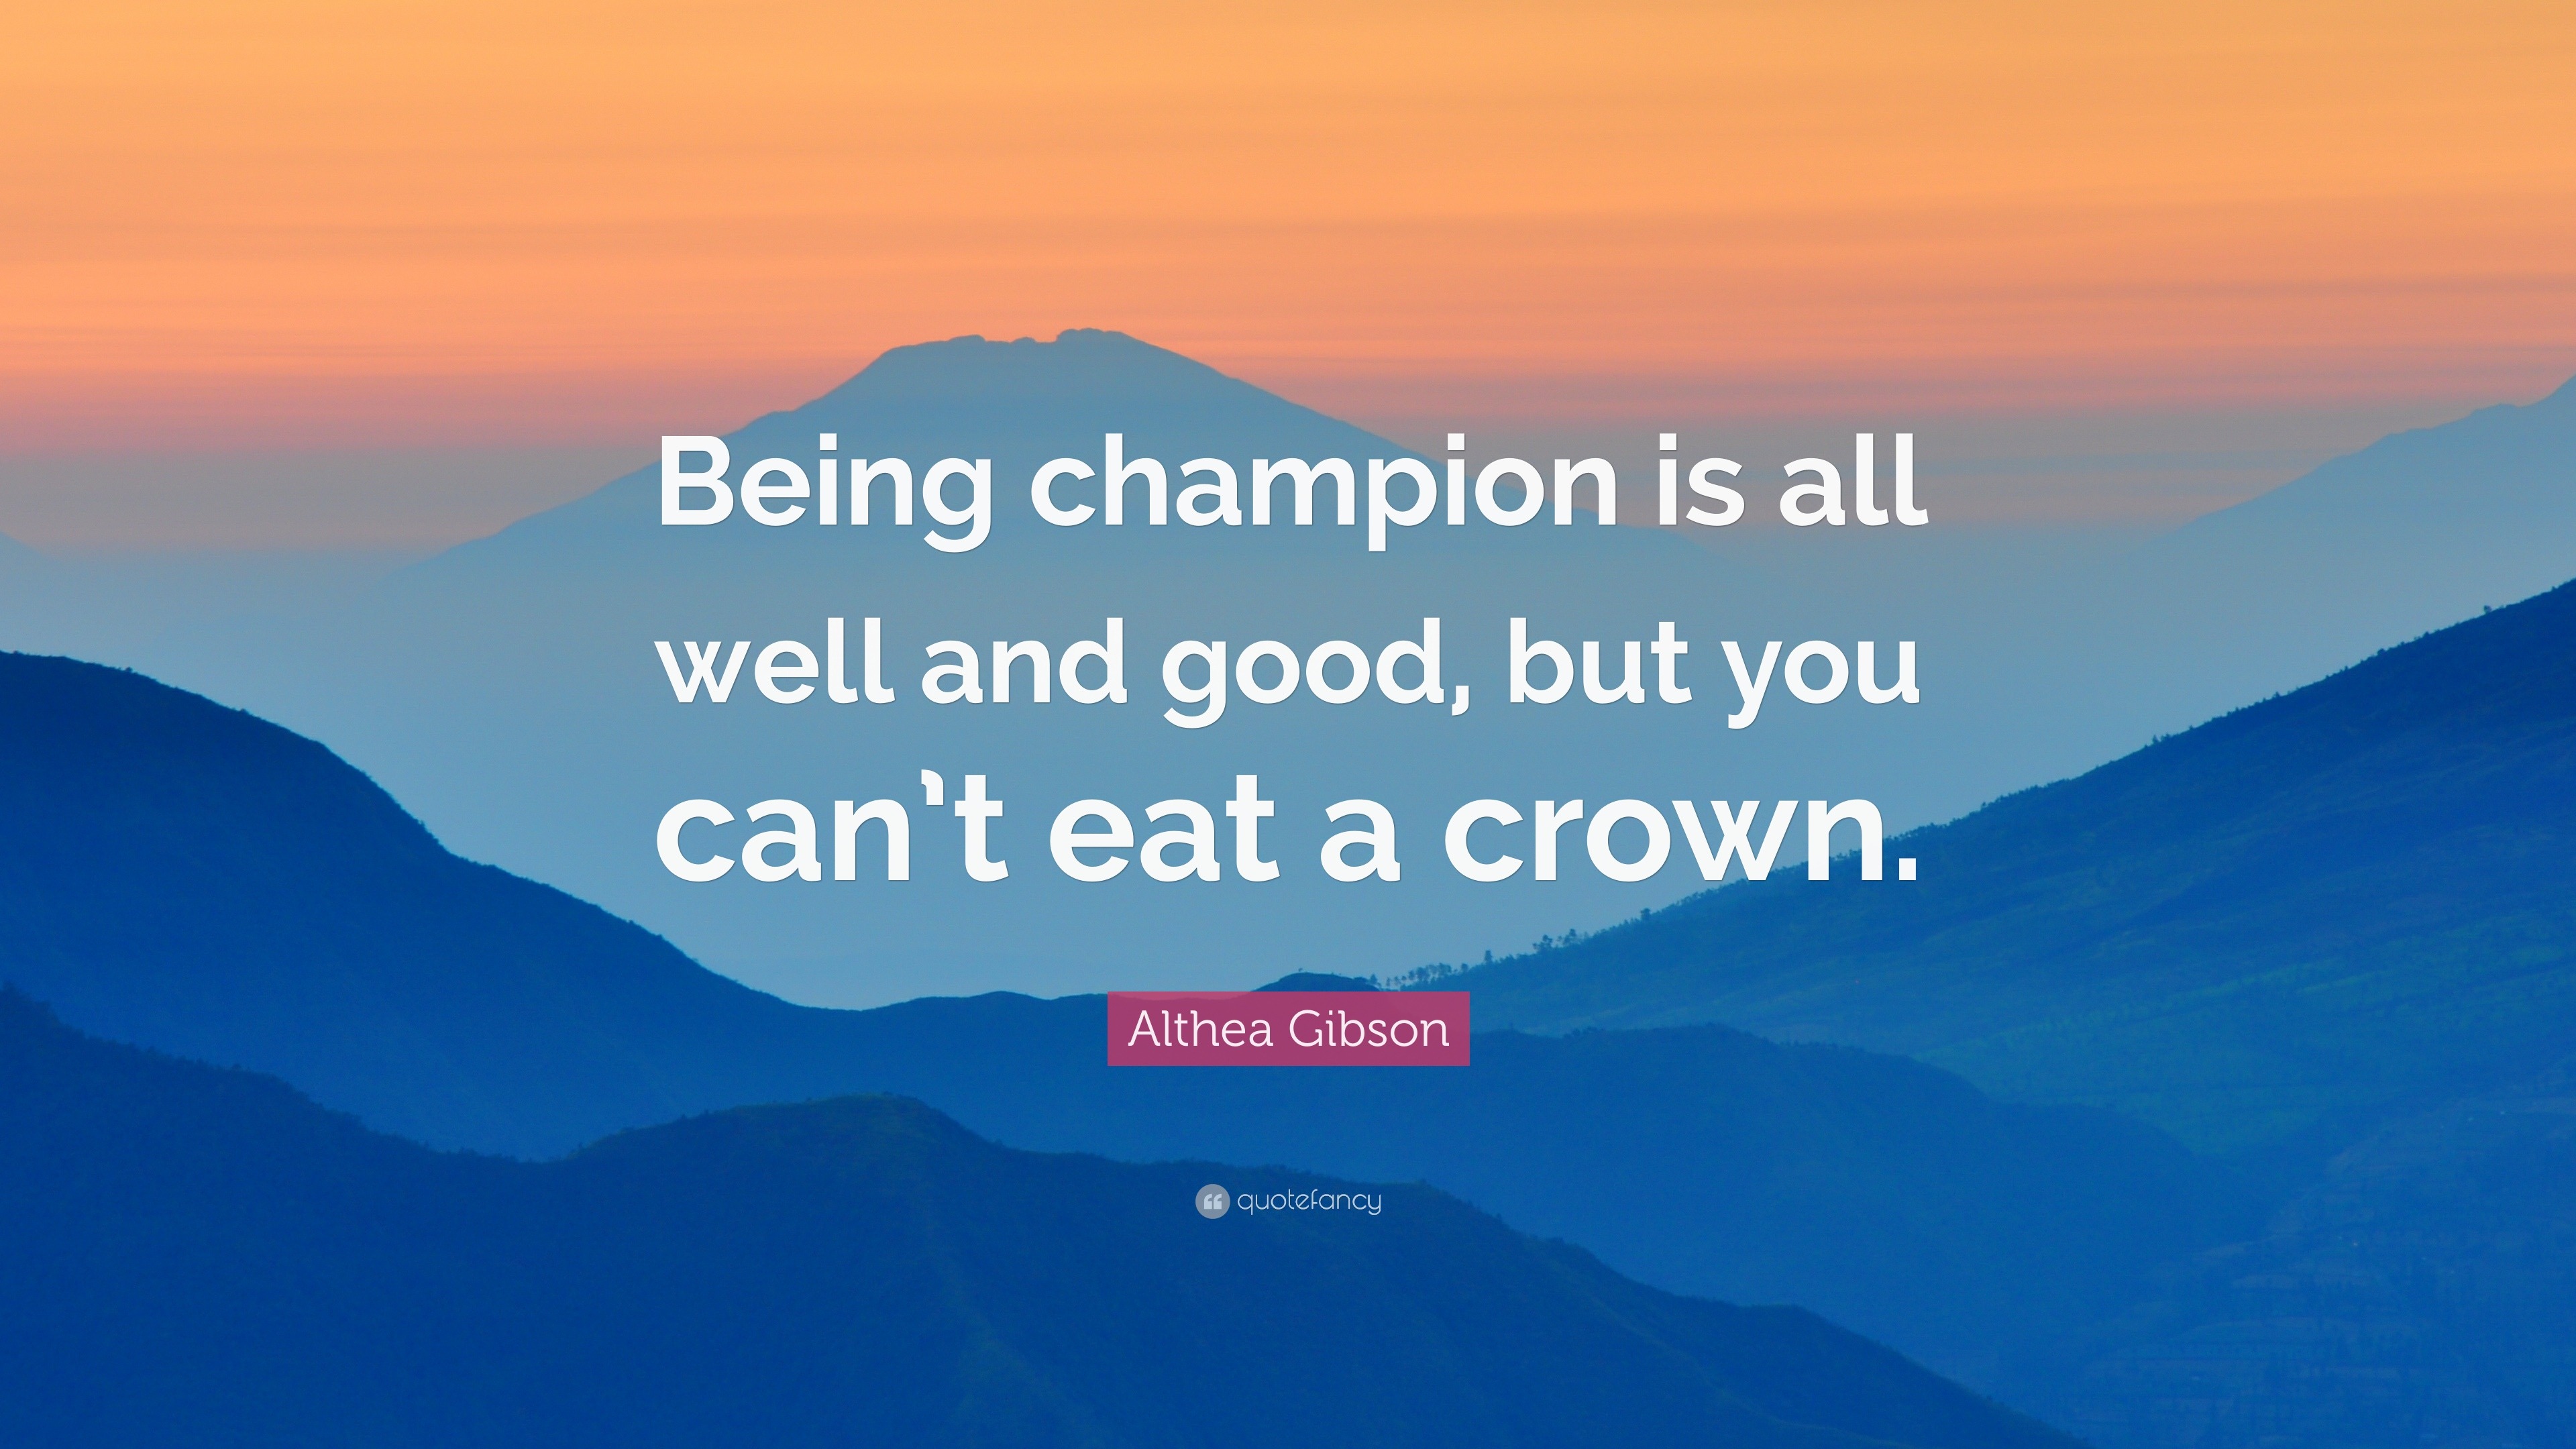 Althea Gibson Quote: “Being champion is all well and good, but you can ...